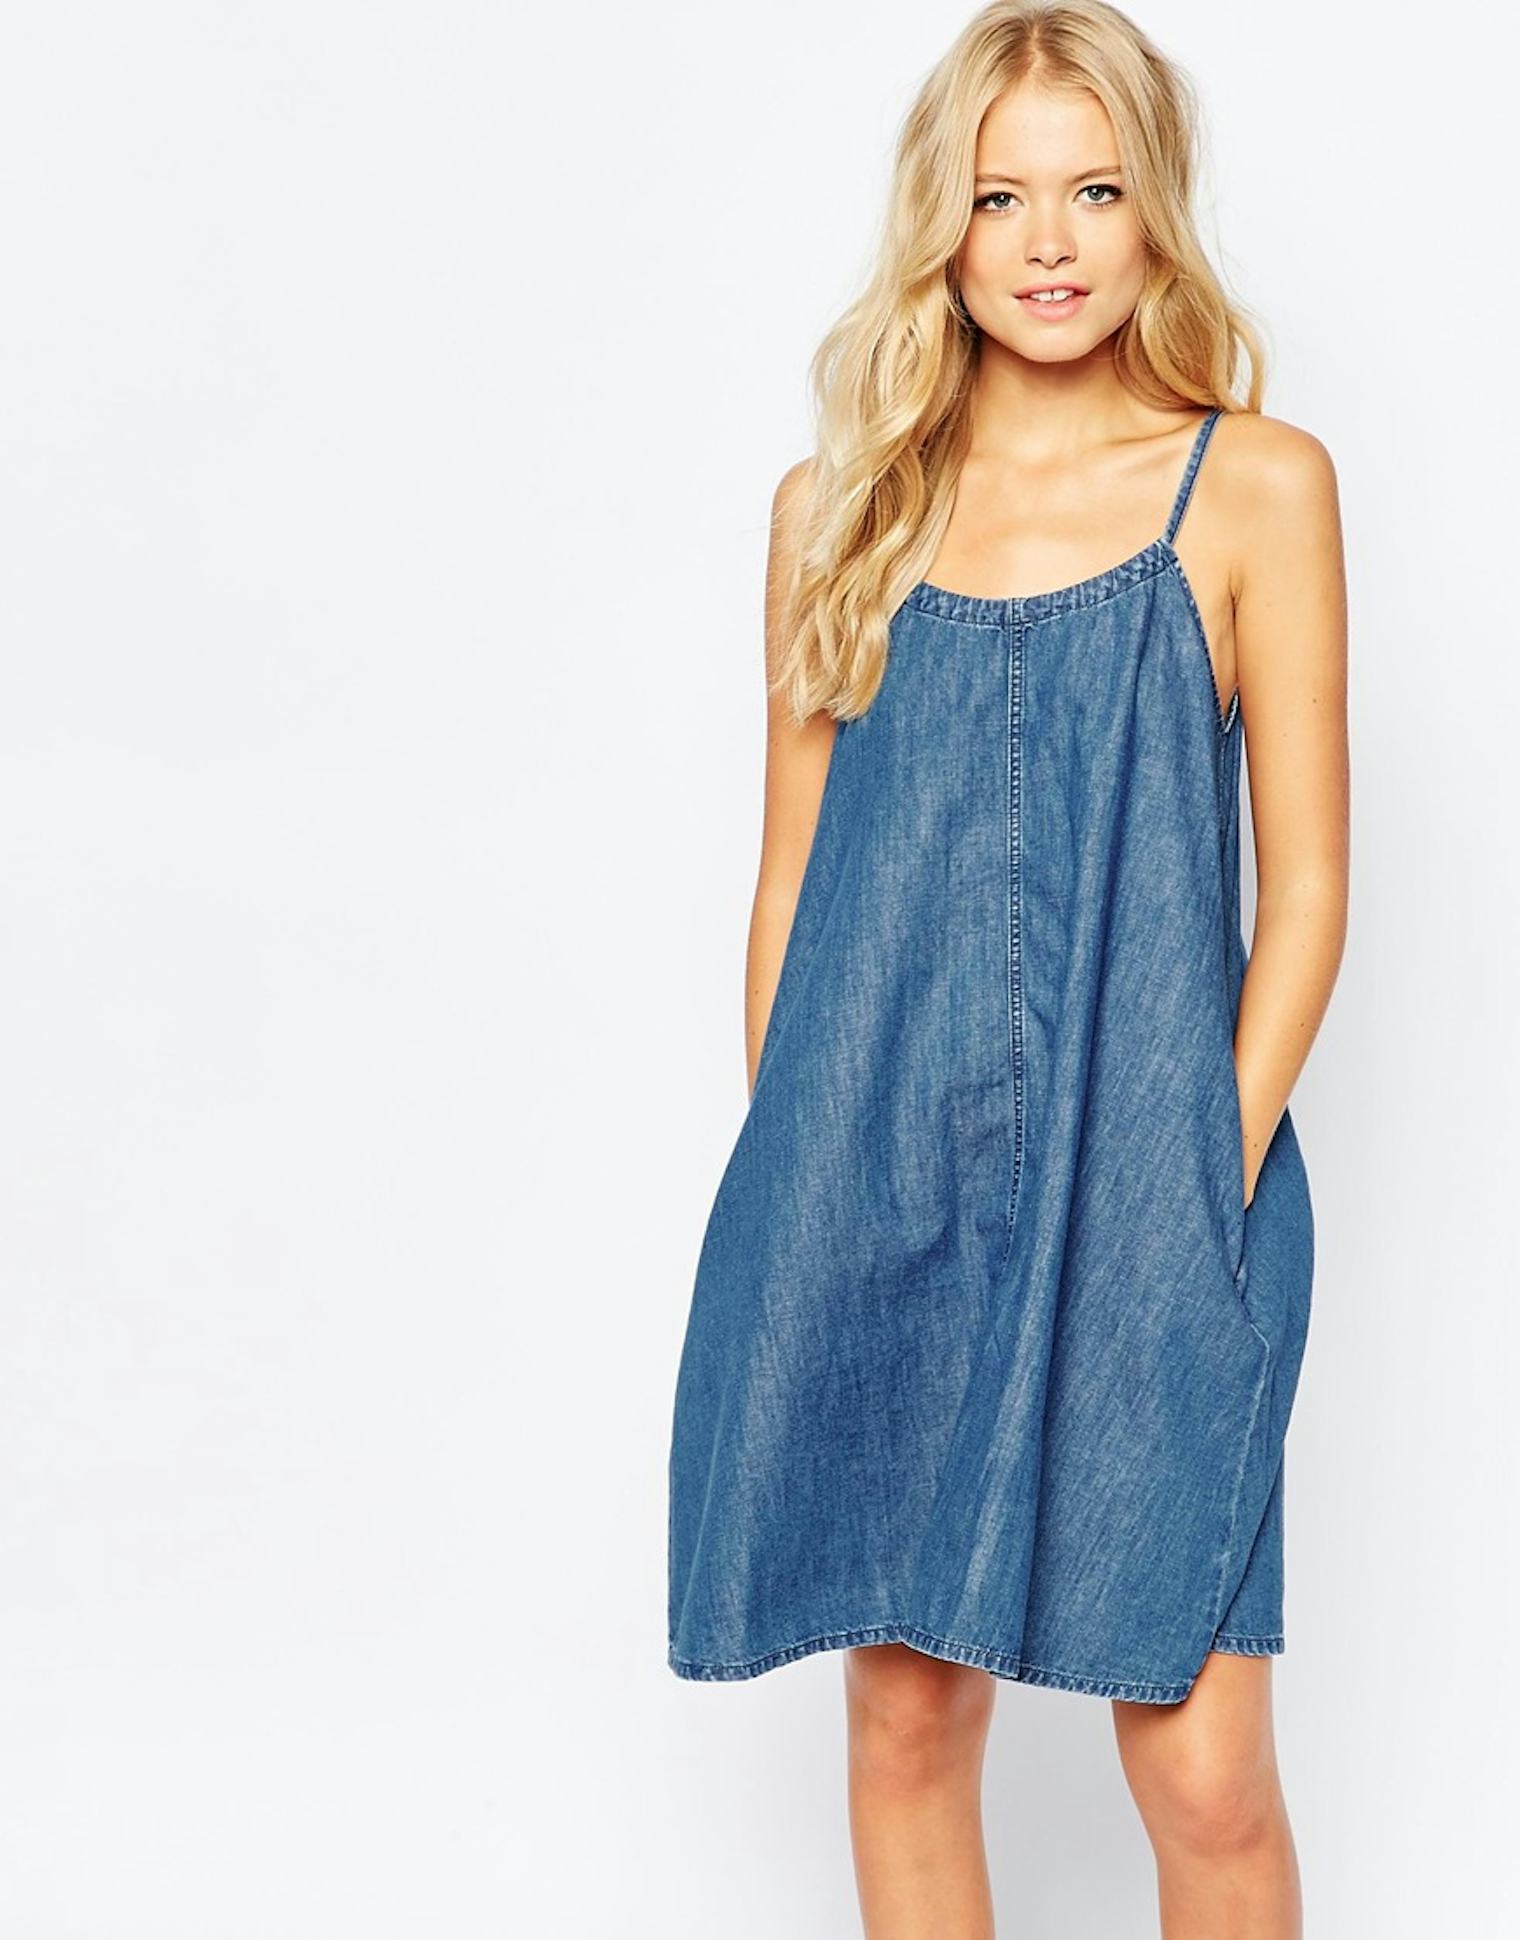 7 Denim Dresses You Need In Your Closet Right Now